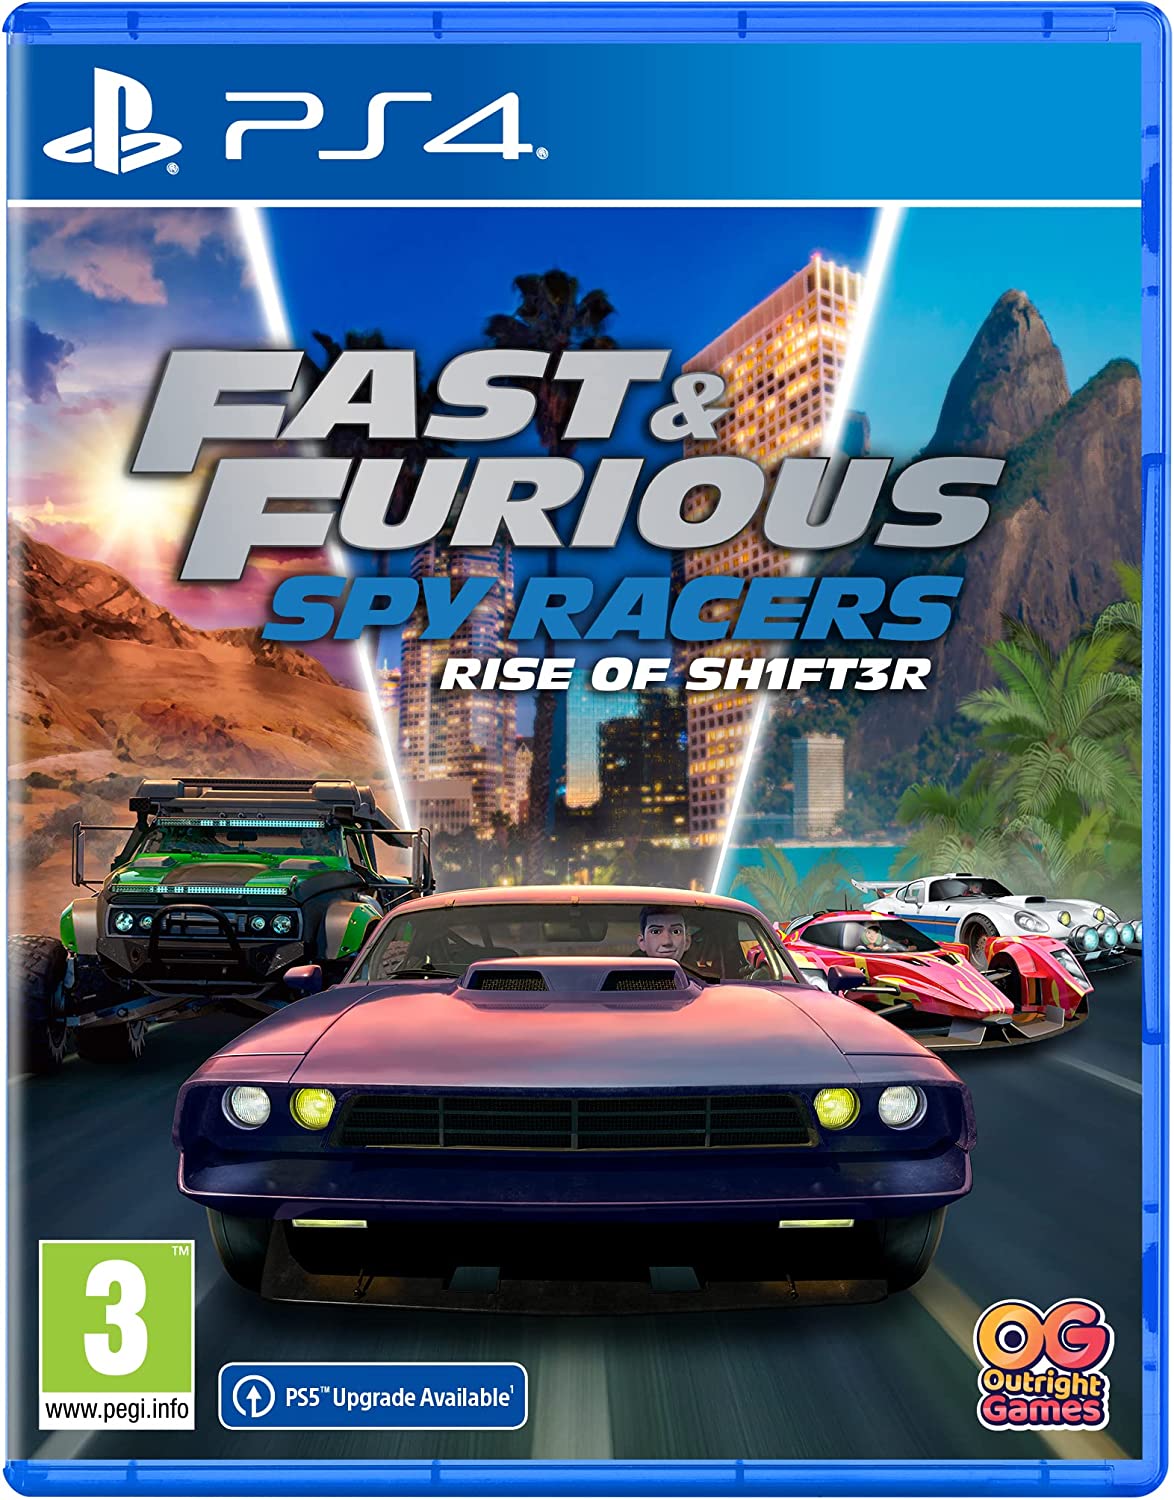 Fast & Furious Spy Racers PS4